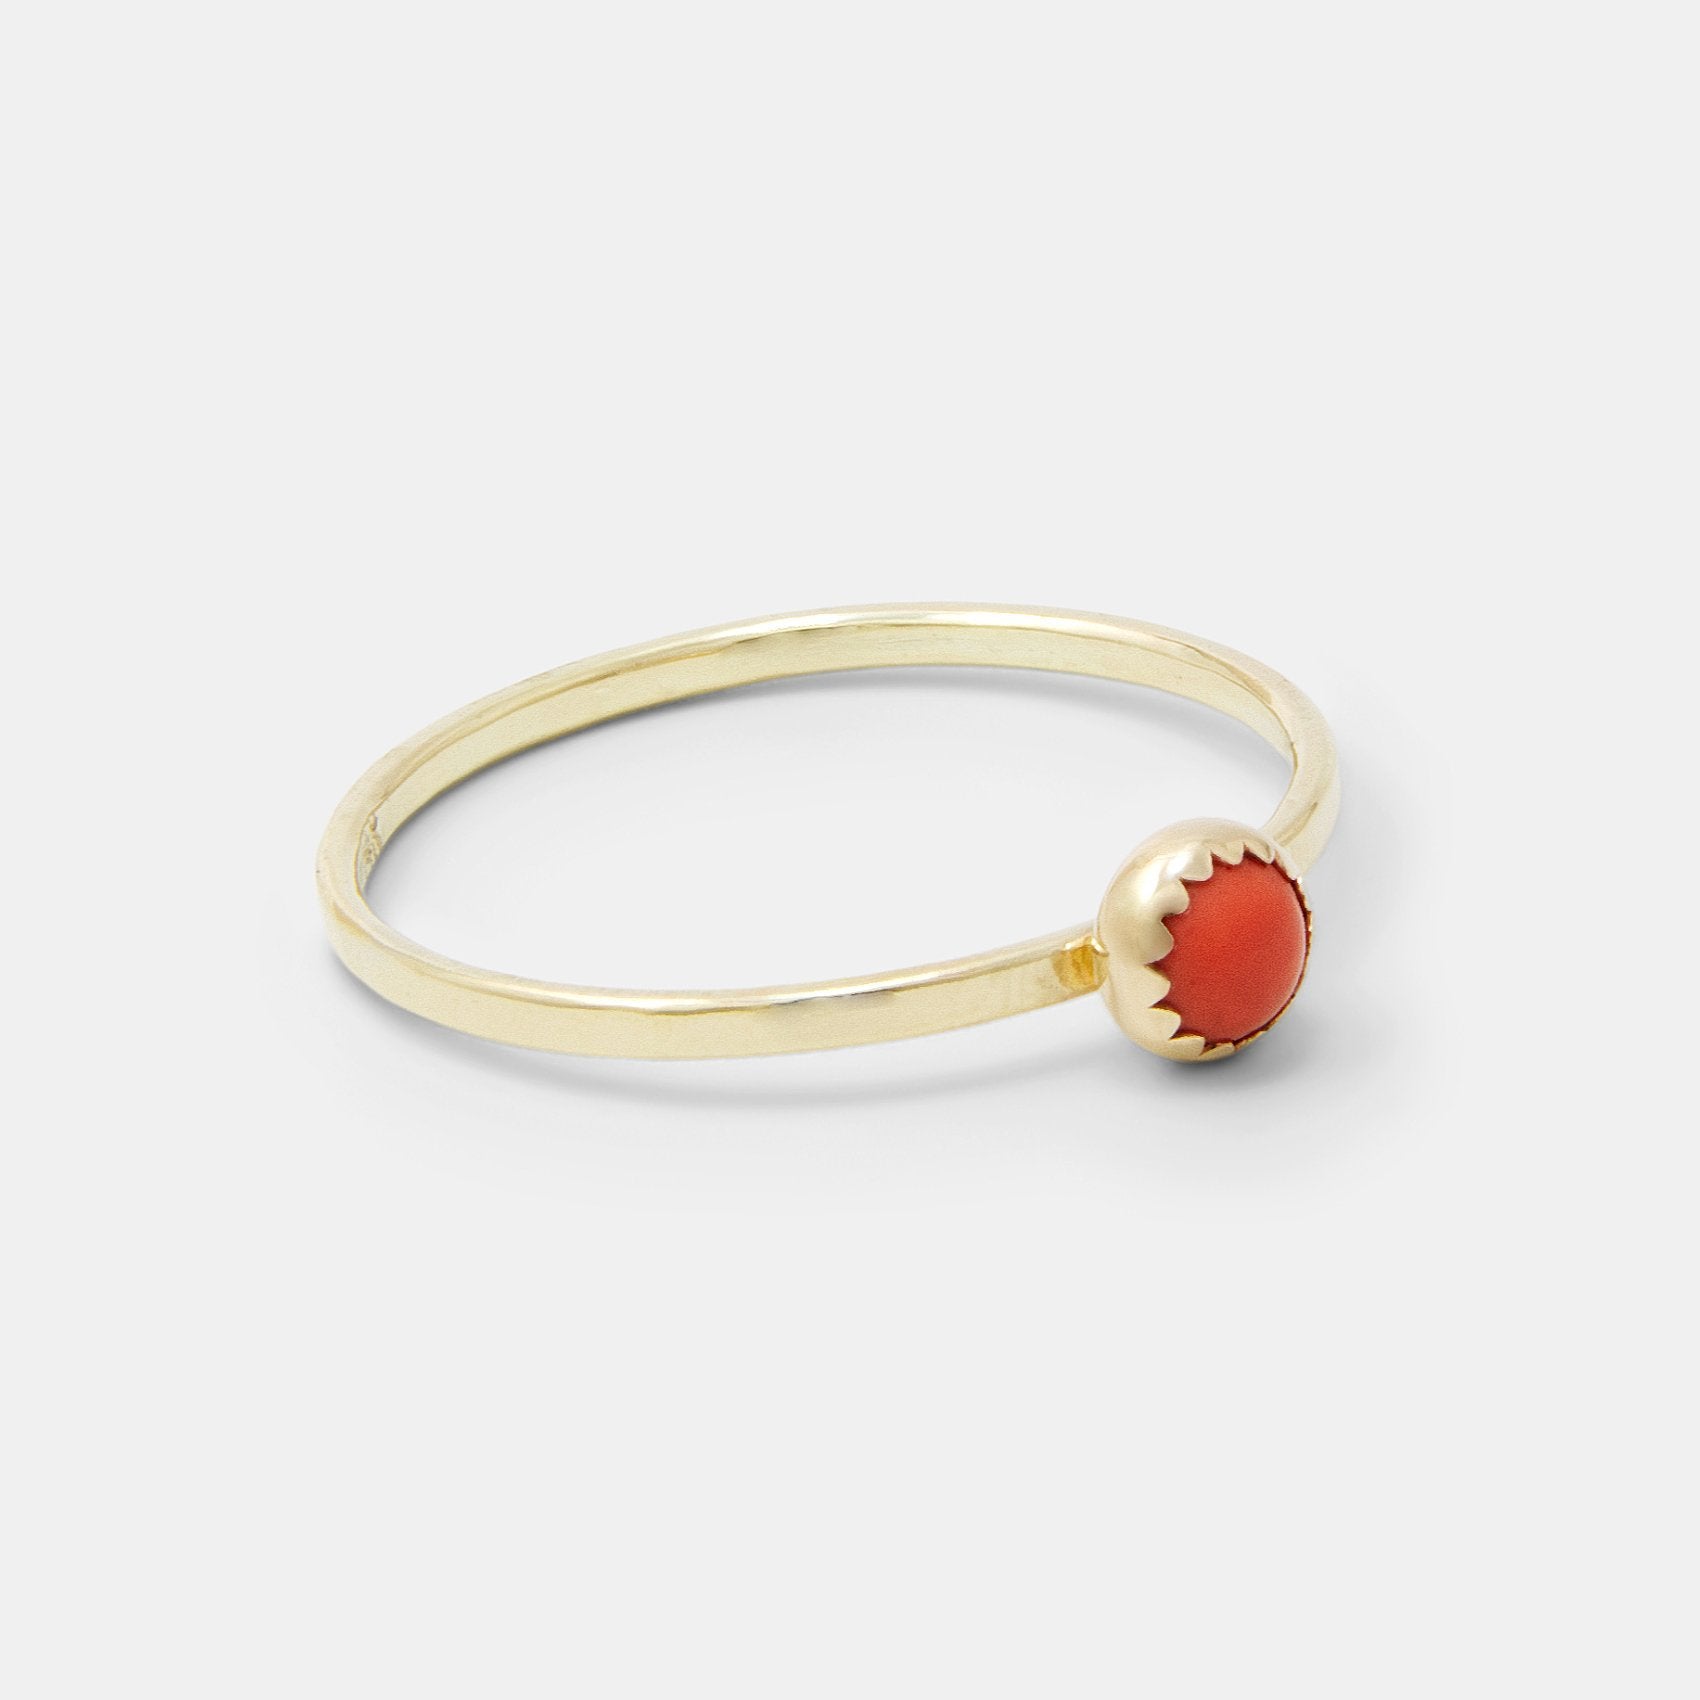 Coral gem & solid gold stacking ring - Simone Walsh Jewellery Australia